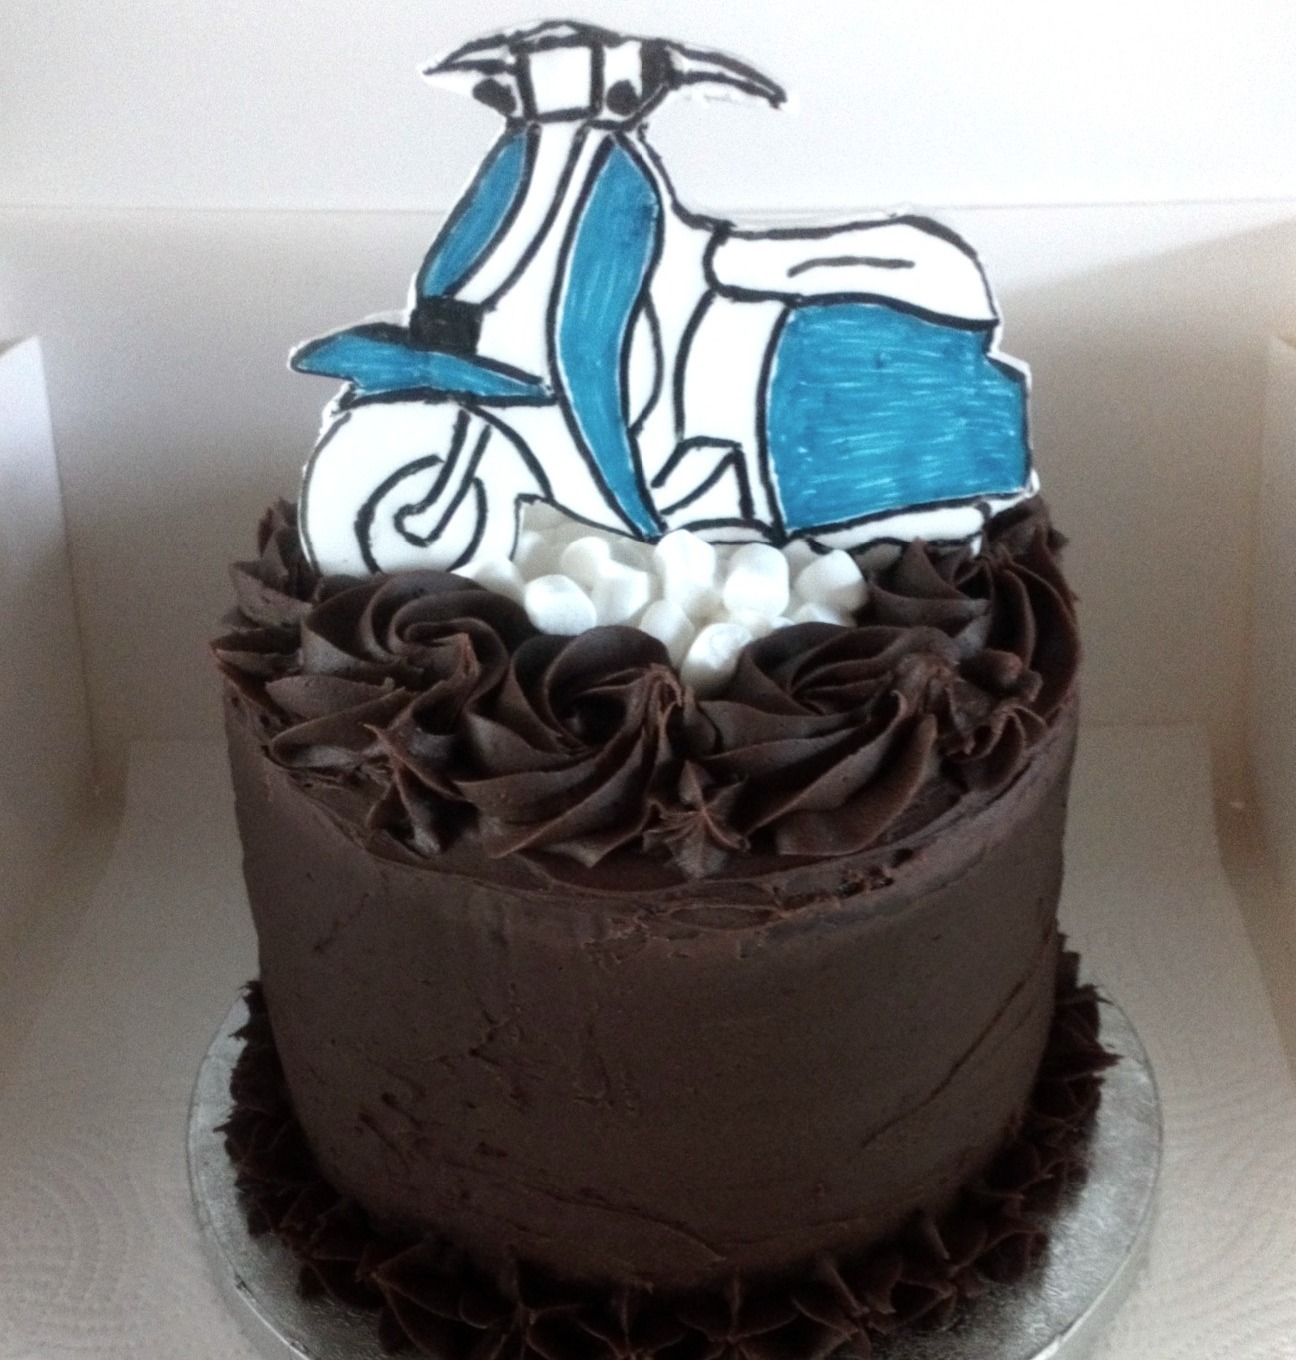 mens chocolate buttercream cake with sugar model scooter